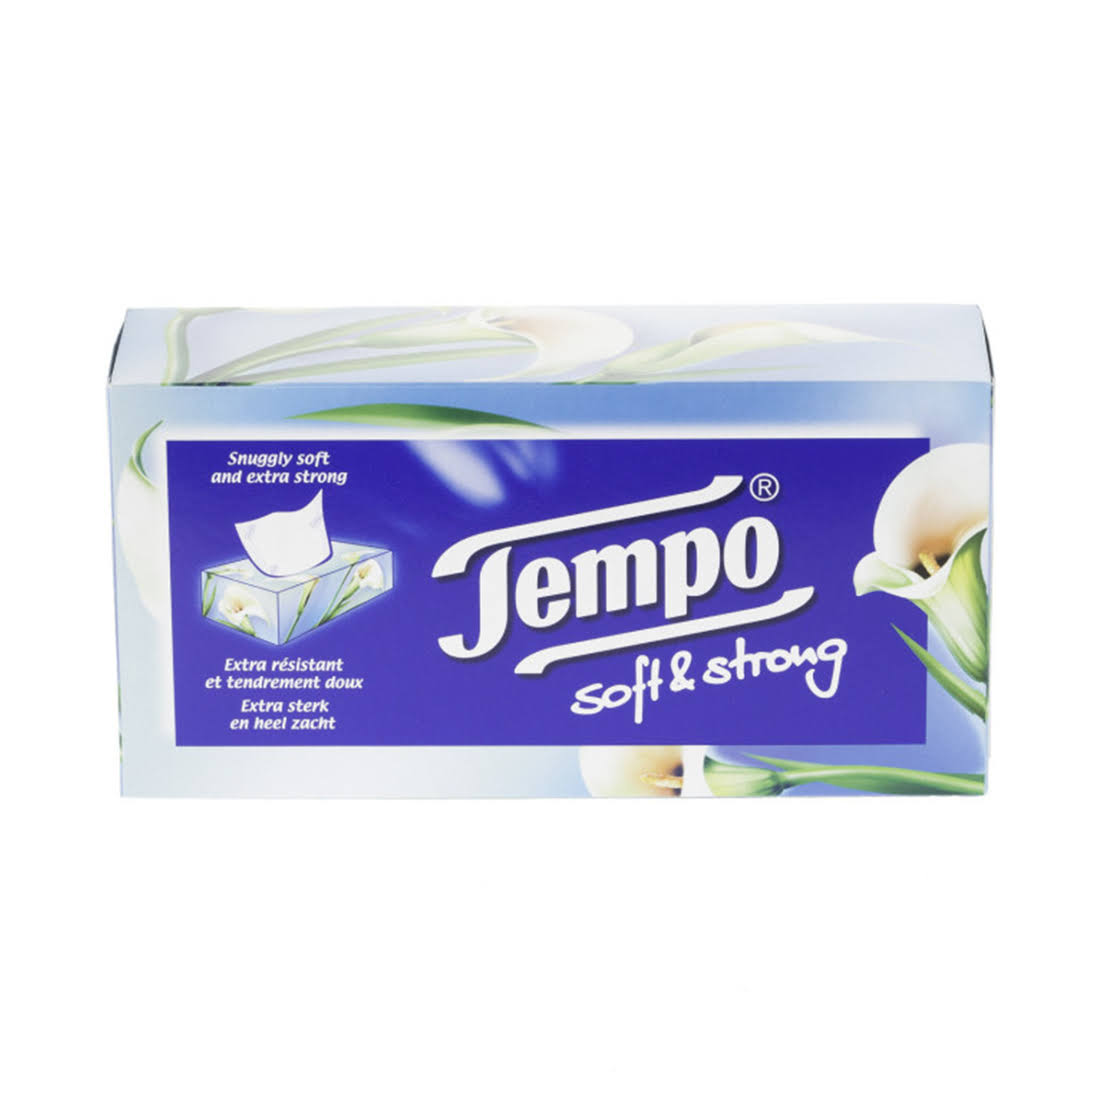 Tempo Soft and Strong Tissues - 80 Handkerchiefs